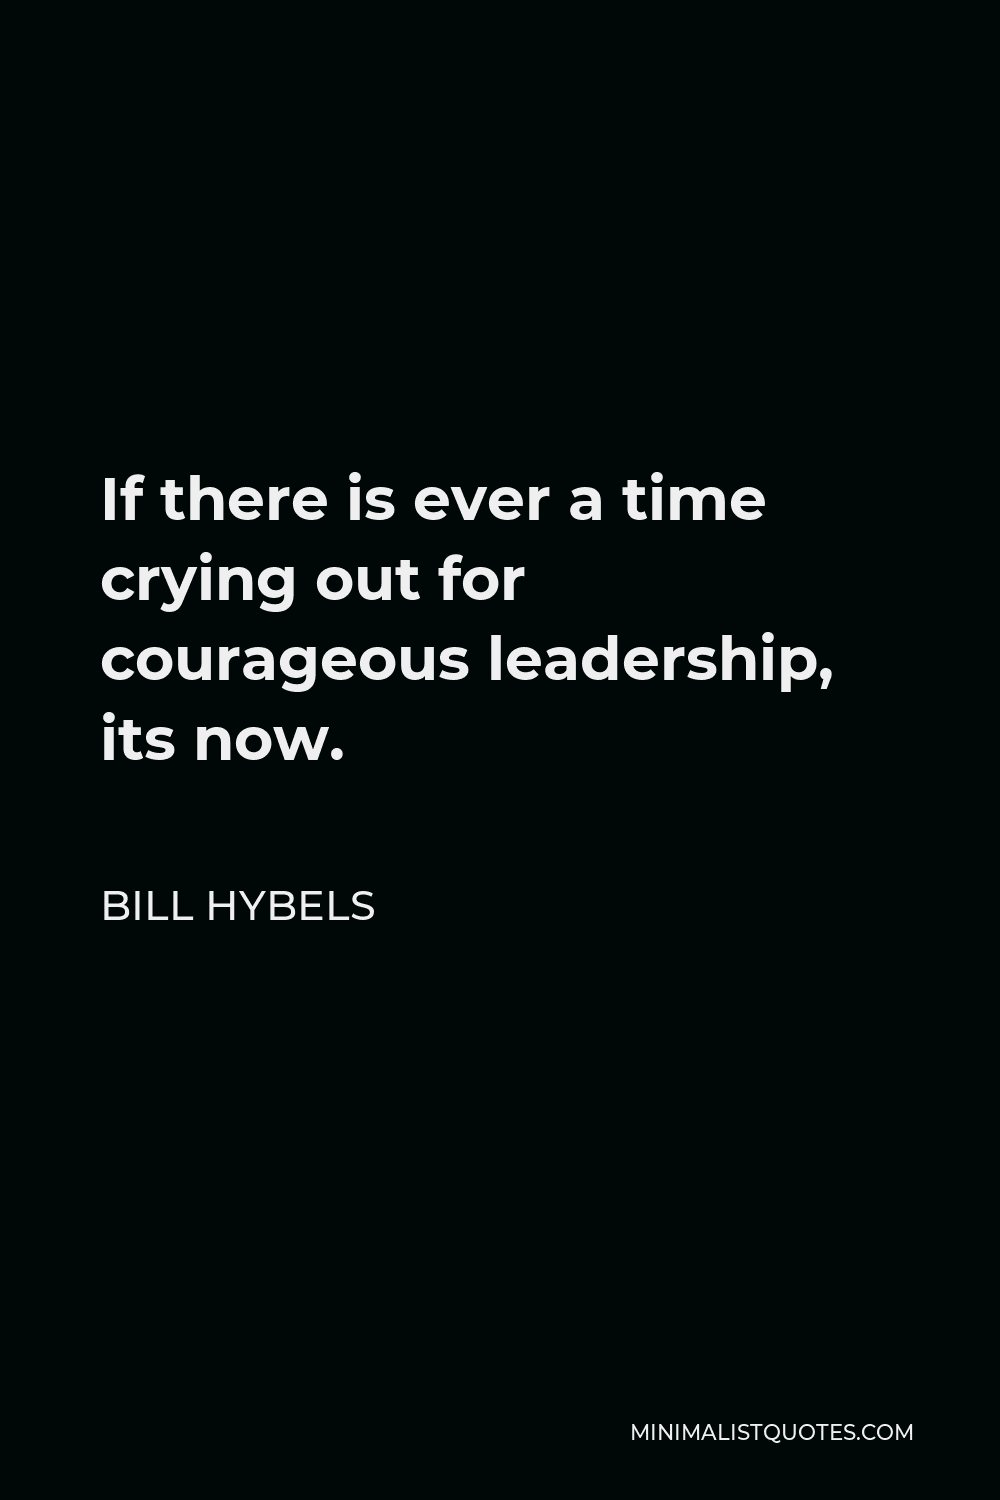 Bill Hybels Quote - If there is ever a time crying out for courageous leadership, its now.